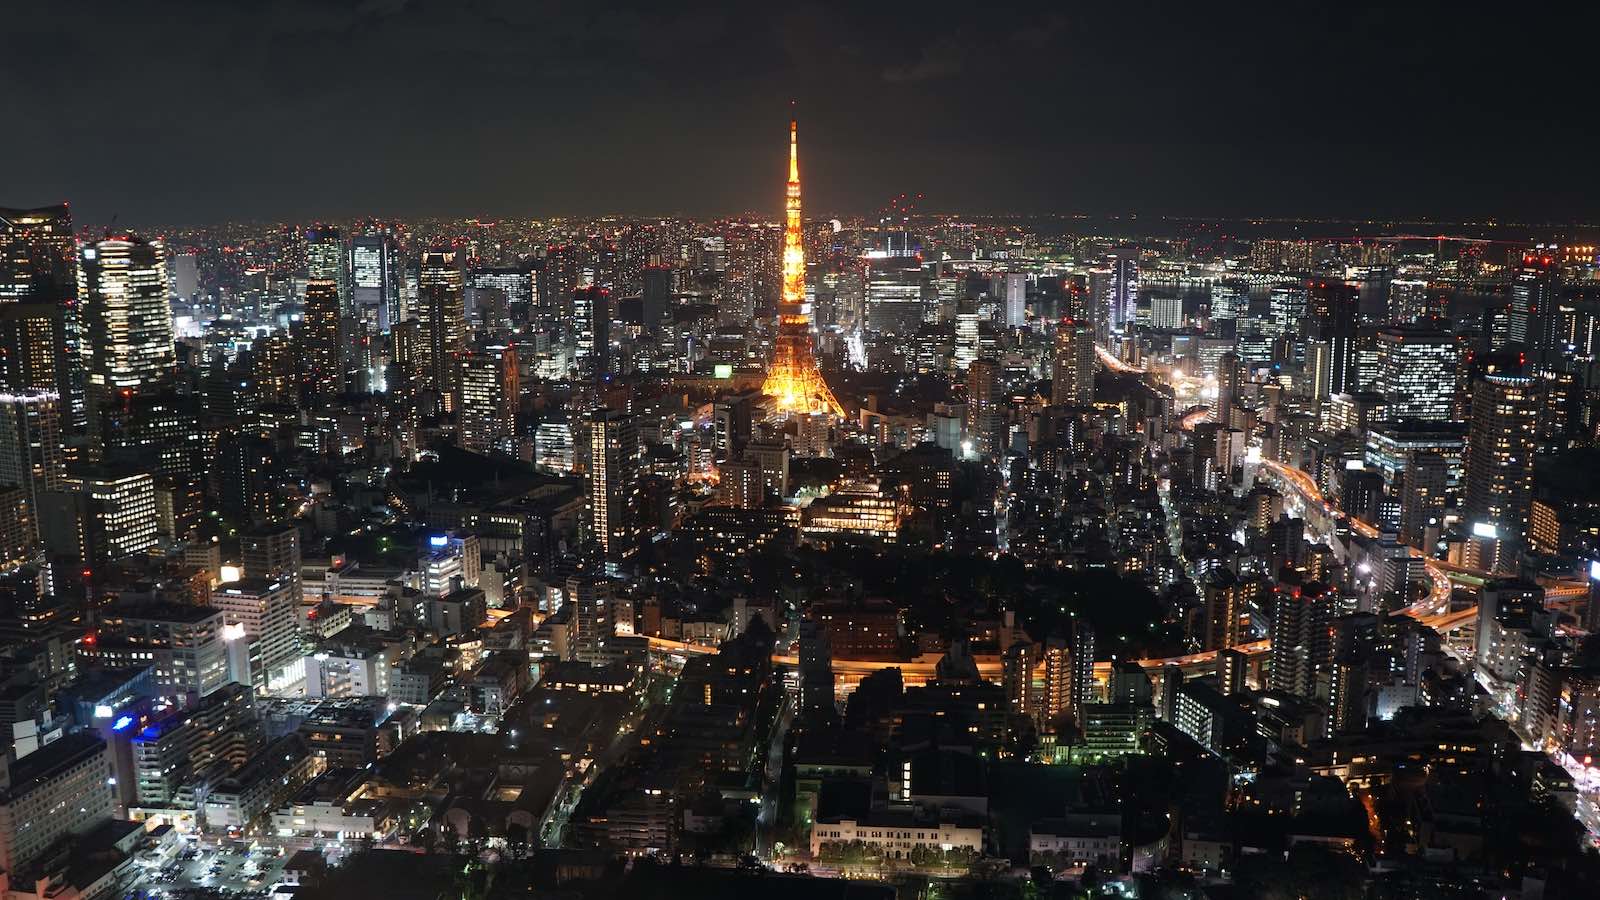 After a much needed nap I made my way out to nearby Roppongi Tower for a view of the city. I made a goal for myself to snap a skyline photo in every major city I visited and Tokyo was one I was looking forward to seeing. It did not disappoint.